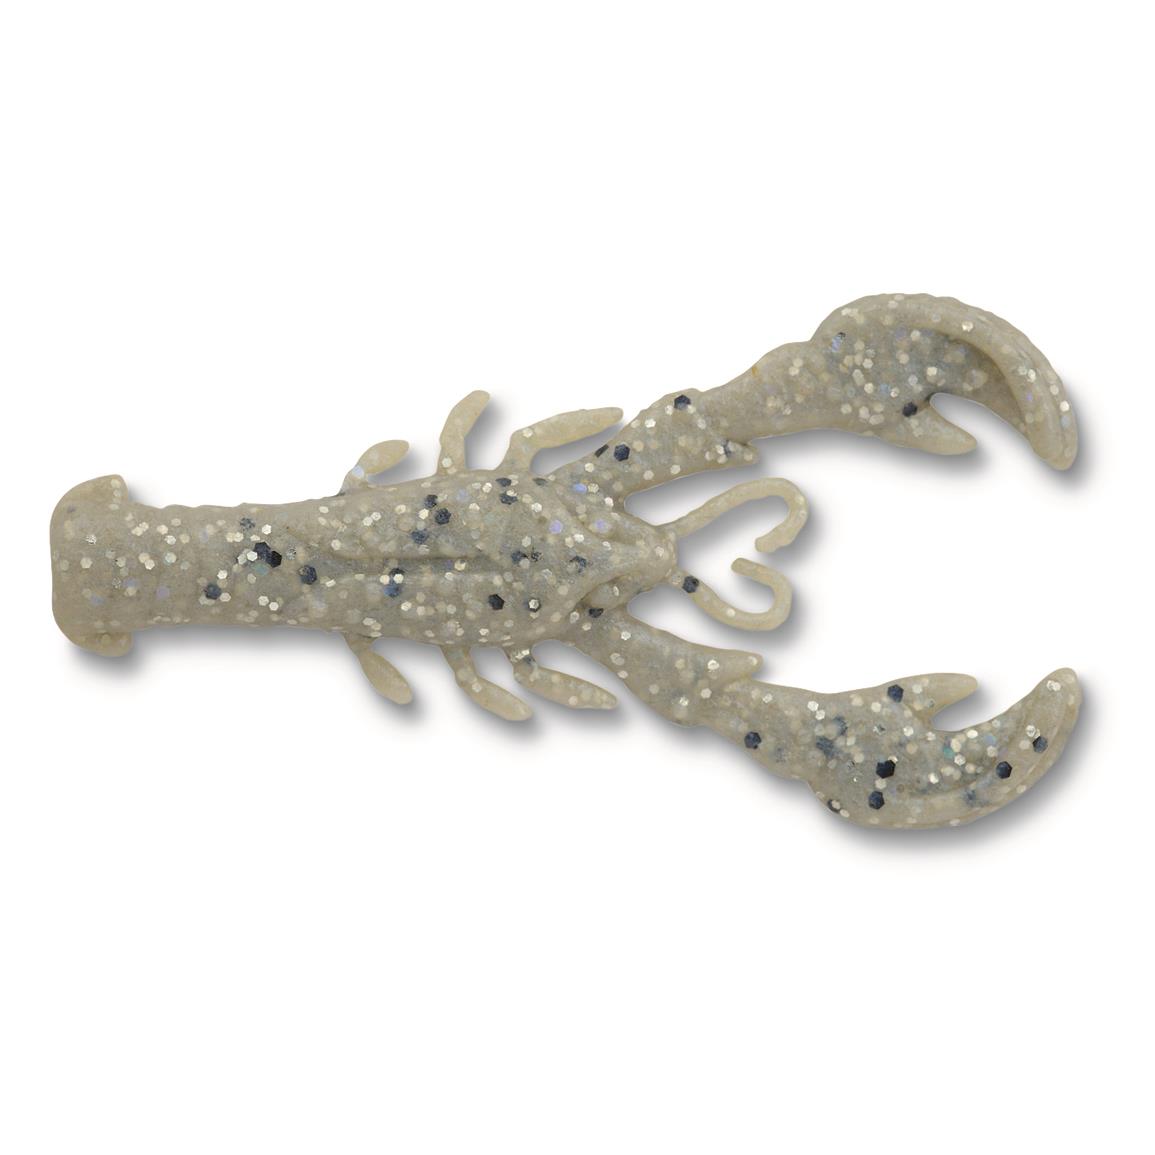 Lunkerhunt Pre-Rigged Finesse Worm - 733228, Soft Baits at Sportsman's Guide